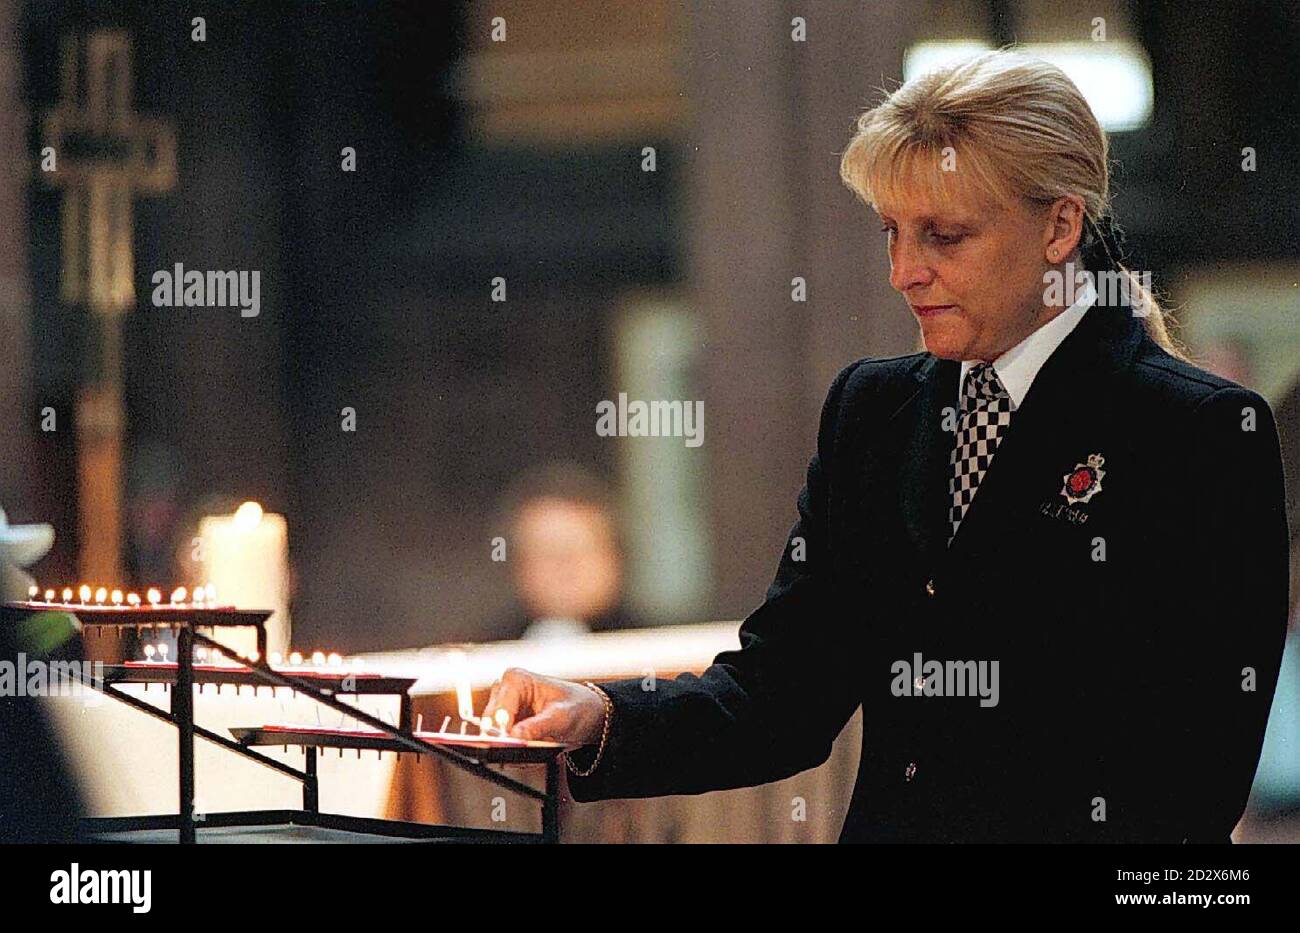 WPc Vanessa Winstanley, the constable who discovered last Saturday's massive IRA bomb in Manchester City Centre, lights a candle at the Ecumenical Service in Manchester Cathedral this morning (Saturday). Photo by Brian Williamson/PA. Stock Photo